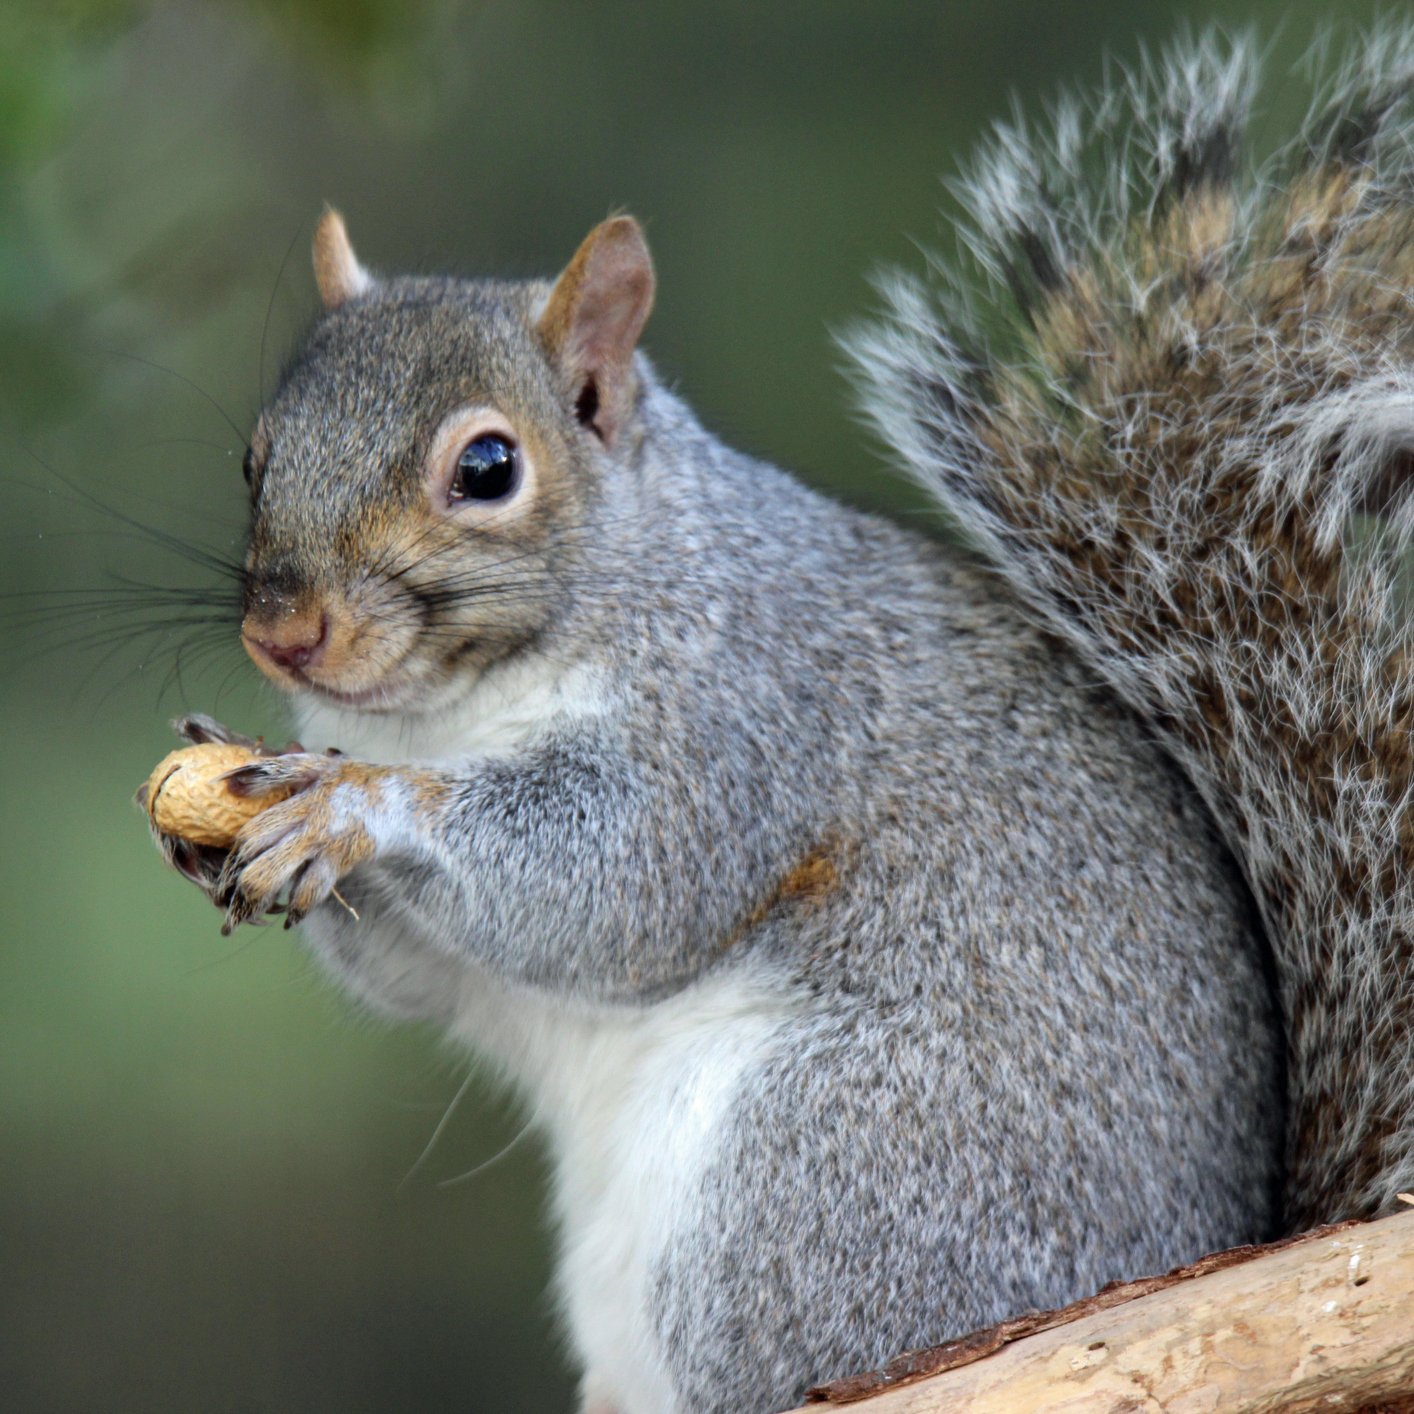 Twelve things about Squirrels that will blow your mind